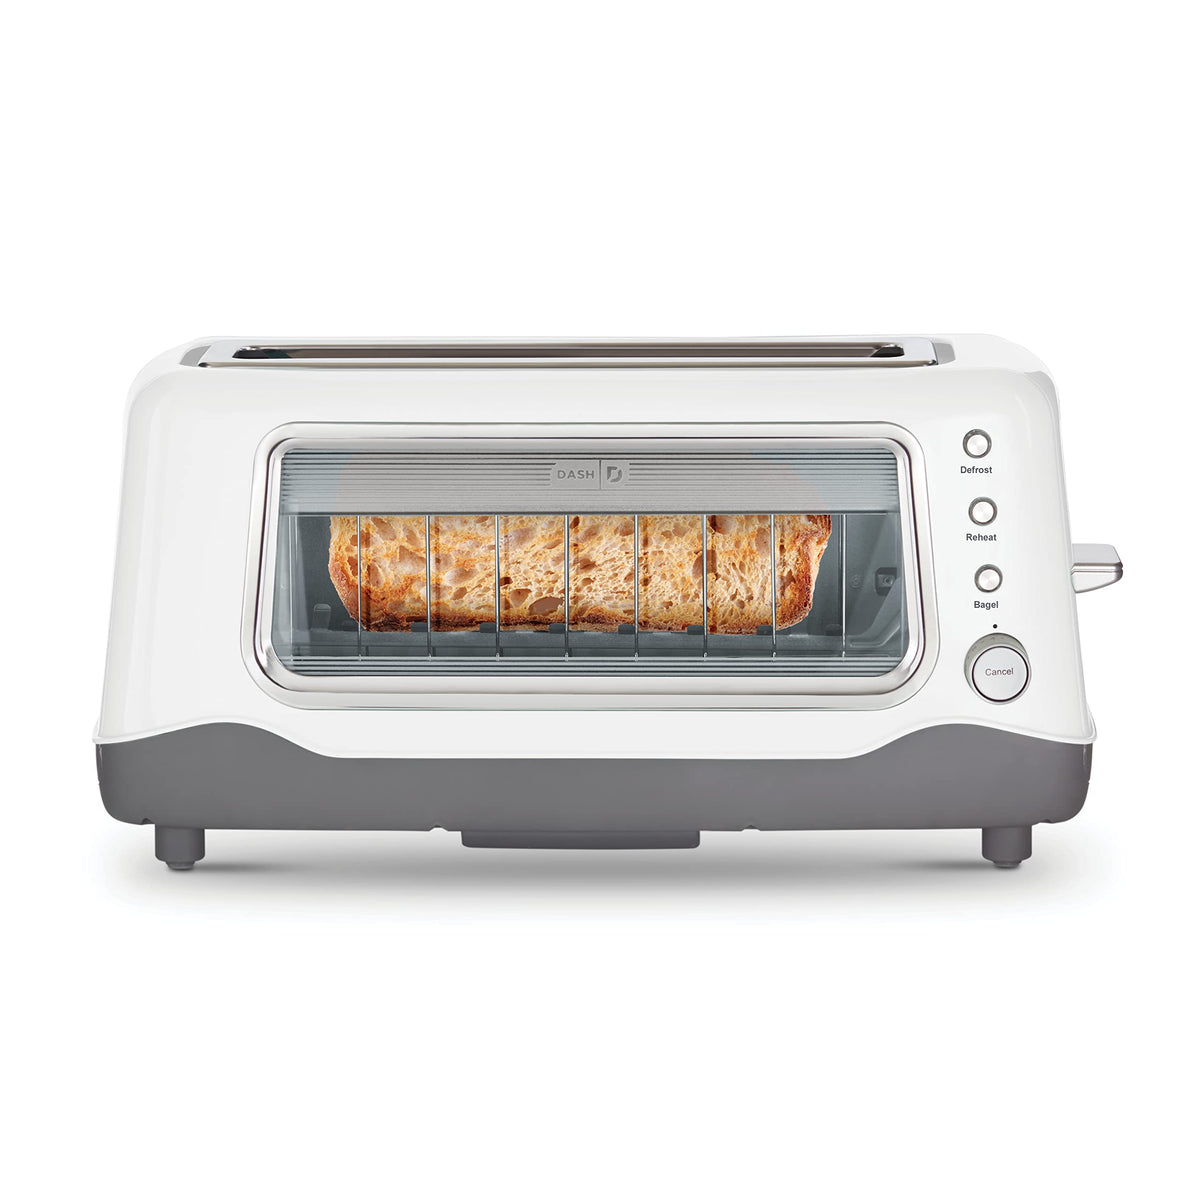 Dash Pop Up Bread Toaster (White) with Wide Slot for any bread- Sourdough, Multigrain, Bagel | 7 Browning Levels with Defrost & Reheat, Removable Crumb Tray | inc. 1 year WARRANTY | 1100 W